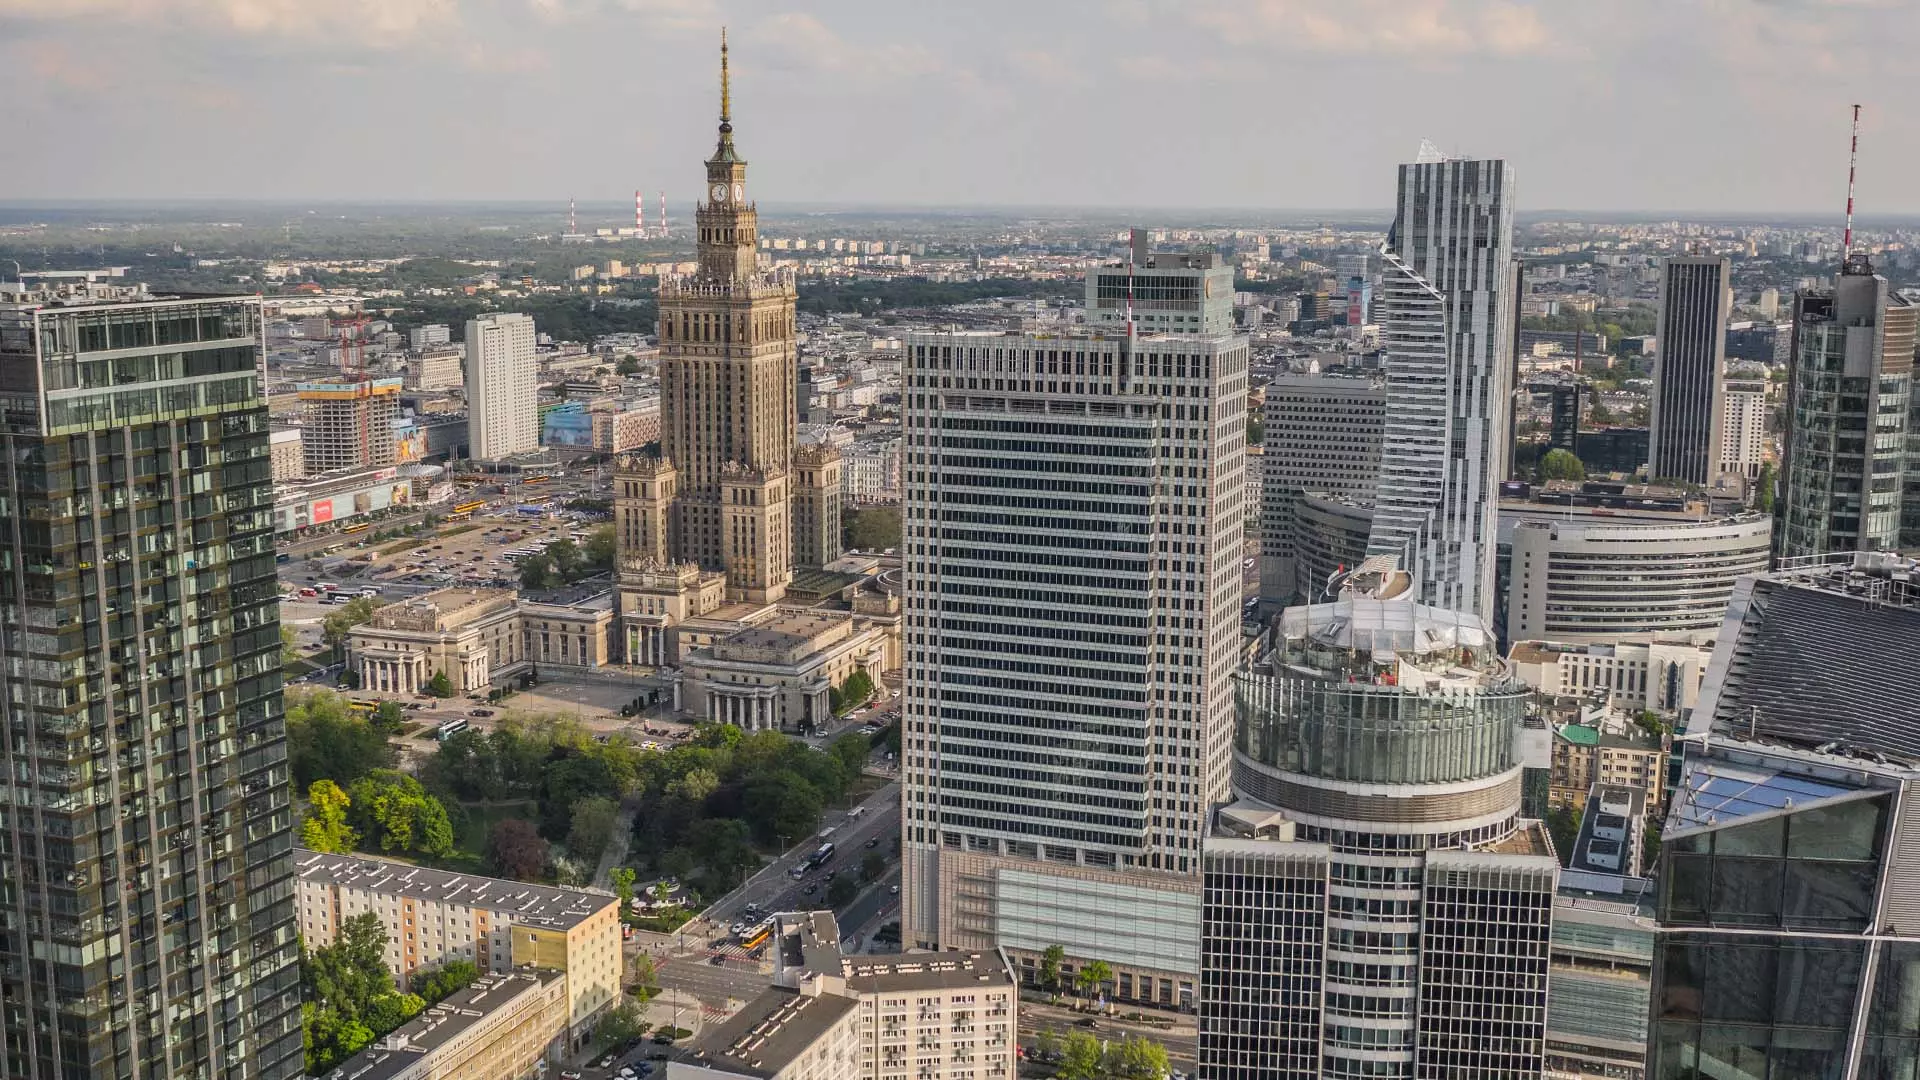 Aerial view of Warsaw downtown on a sunny day